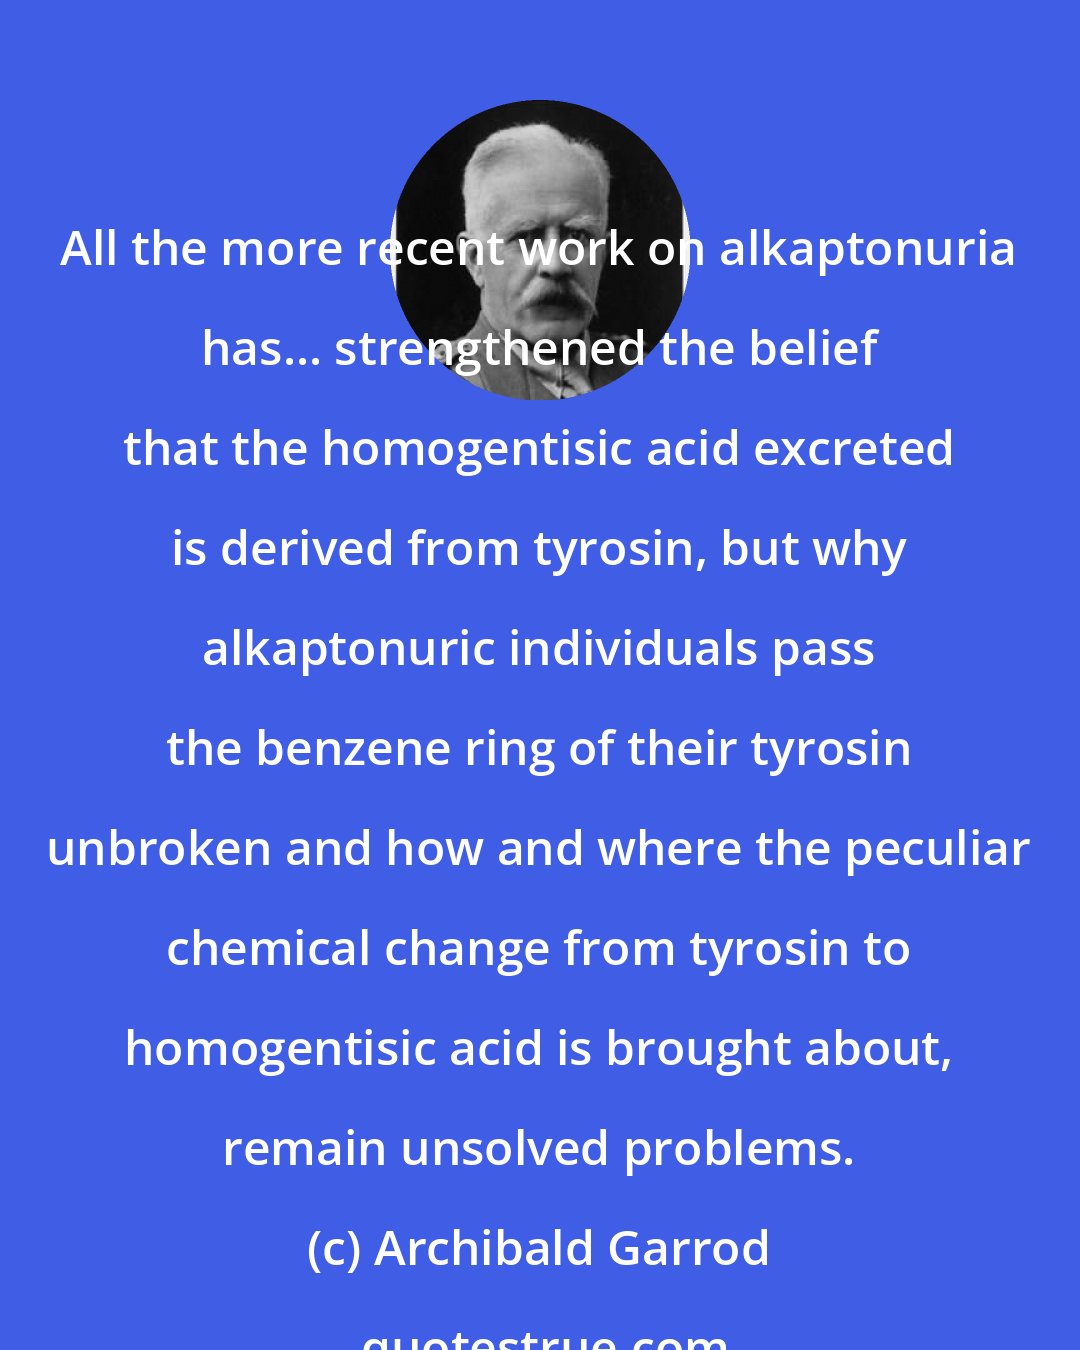 Archibald Garrod: All the more recent work on alkaptonuria has... strengthened the belief that the homogentisic acid excreted is derived from tyrosin, but why alkaptonuric individuals pass the benzene ring of their tyrosin unbroken and how and where the peculiar chemical change from tyrosin to homogentisic acid is brought about, remain unsolved problems.